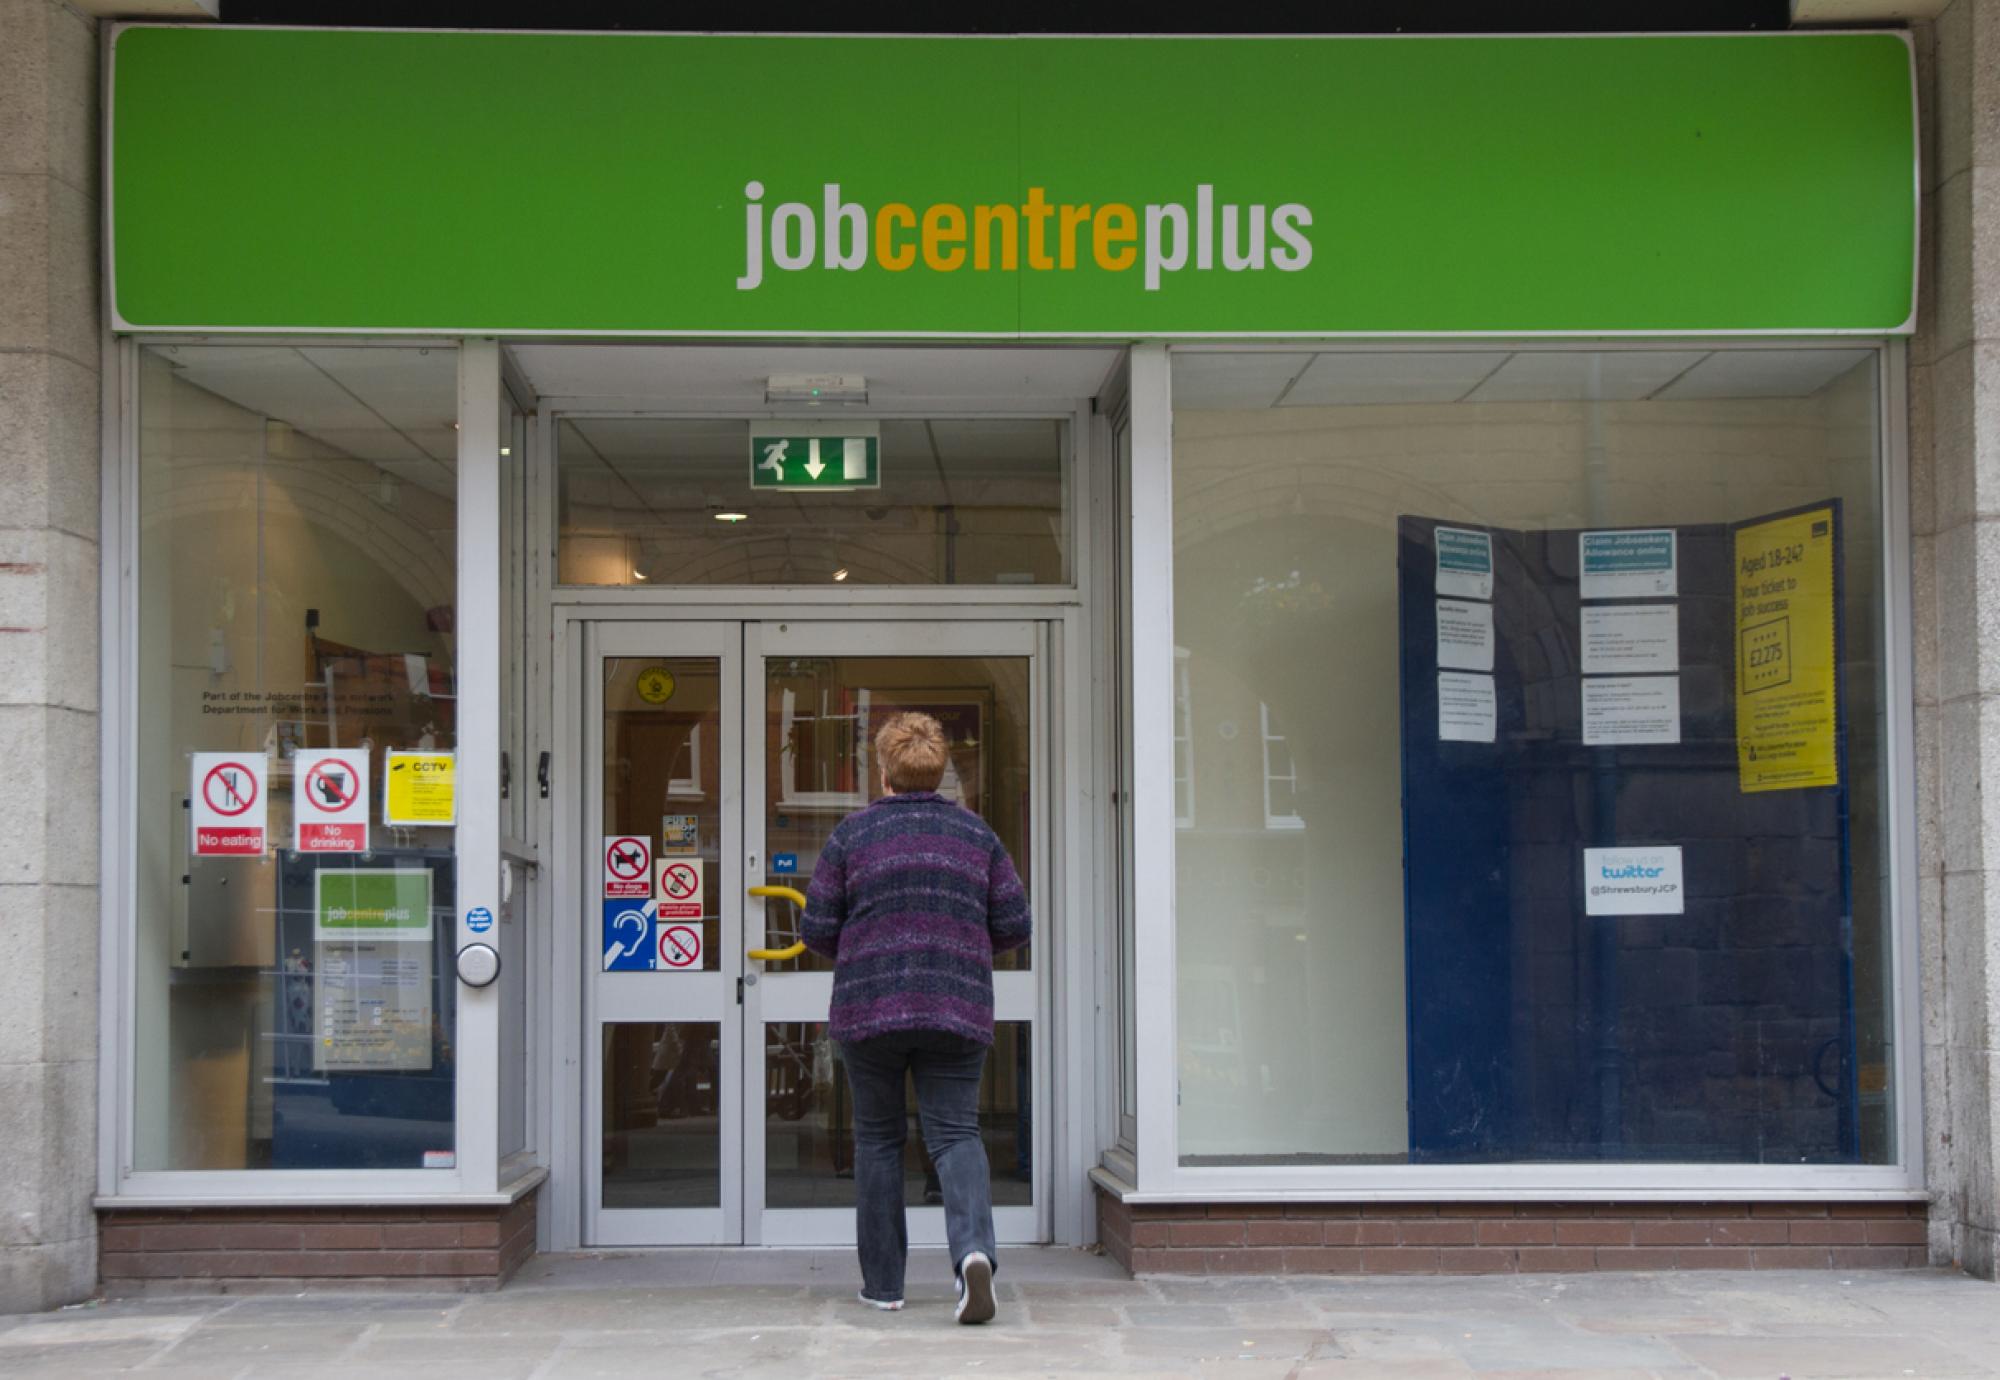 Shot of the entrance to a Job Centre